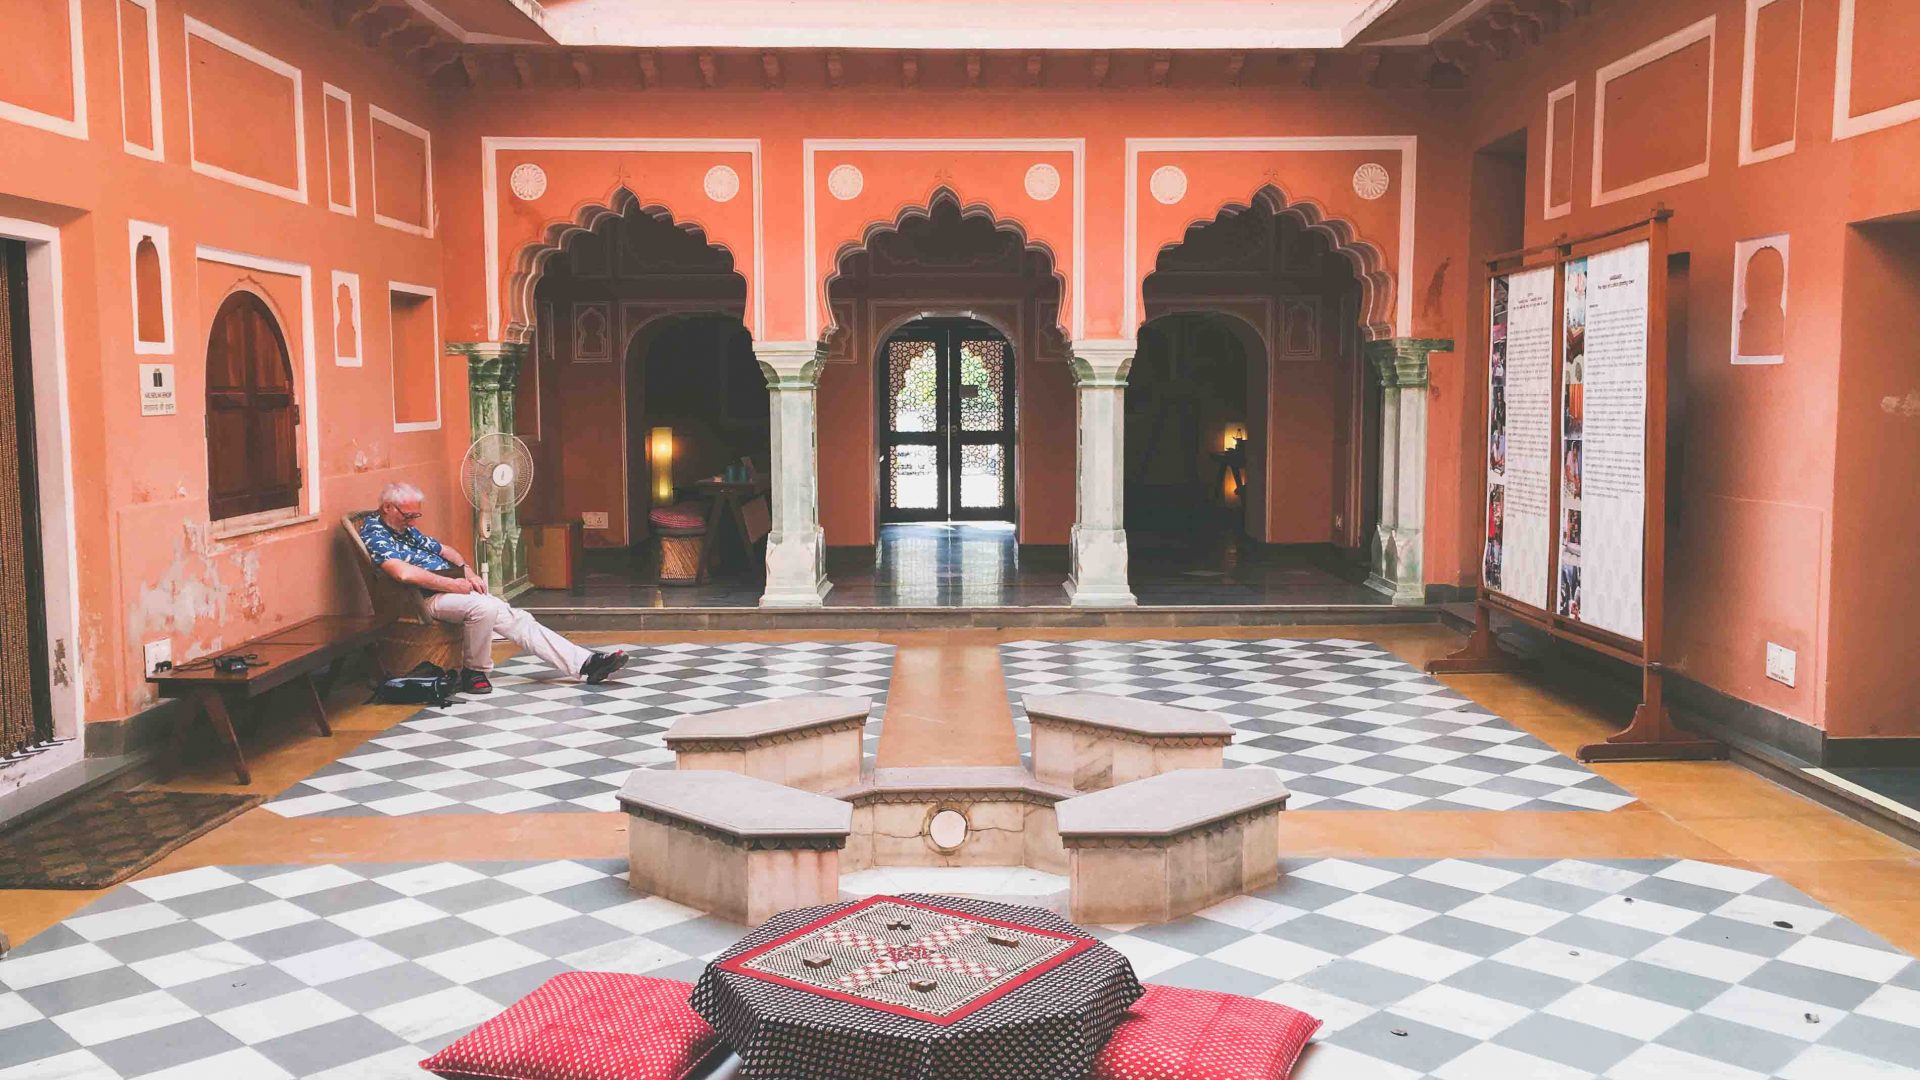 The Anokhi Museum of Hand Printing is inside a restored haveli by Amber Fort in Rajasthan, India.